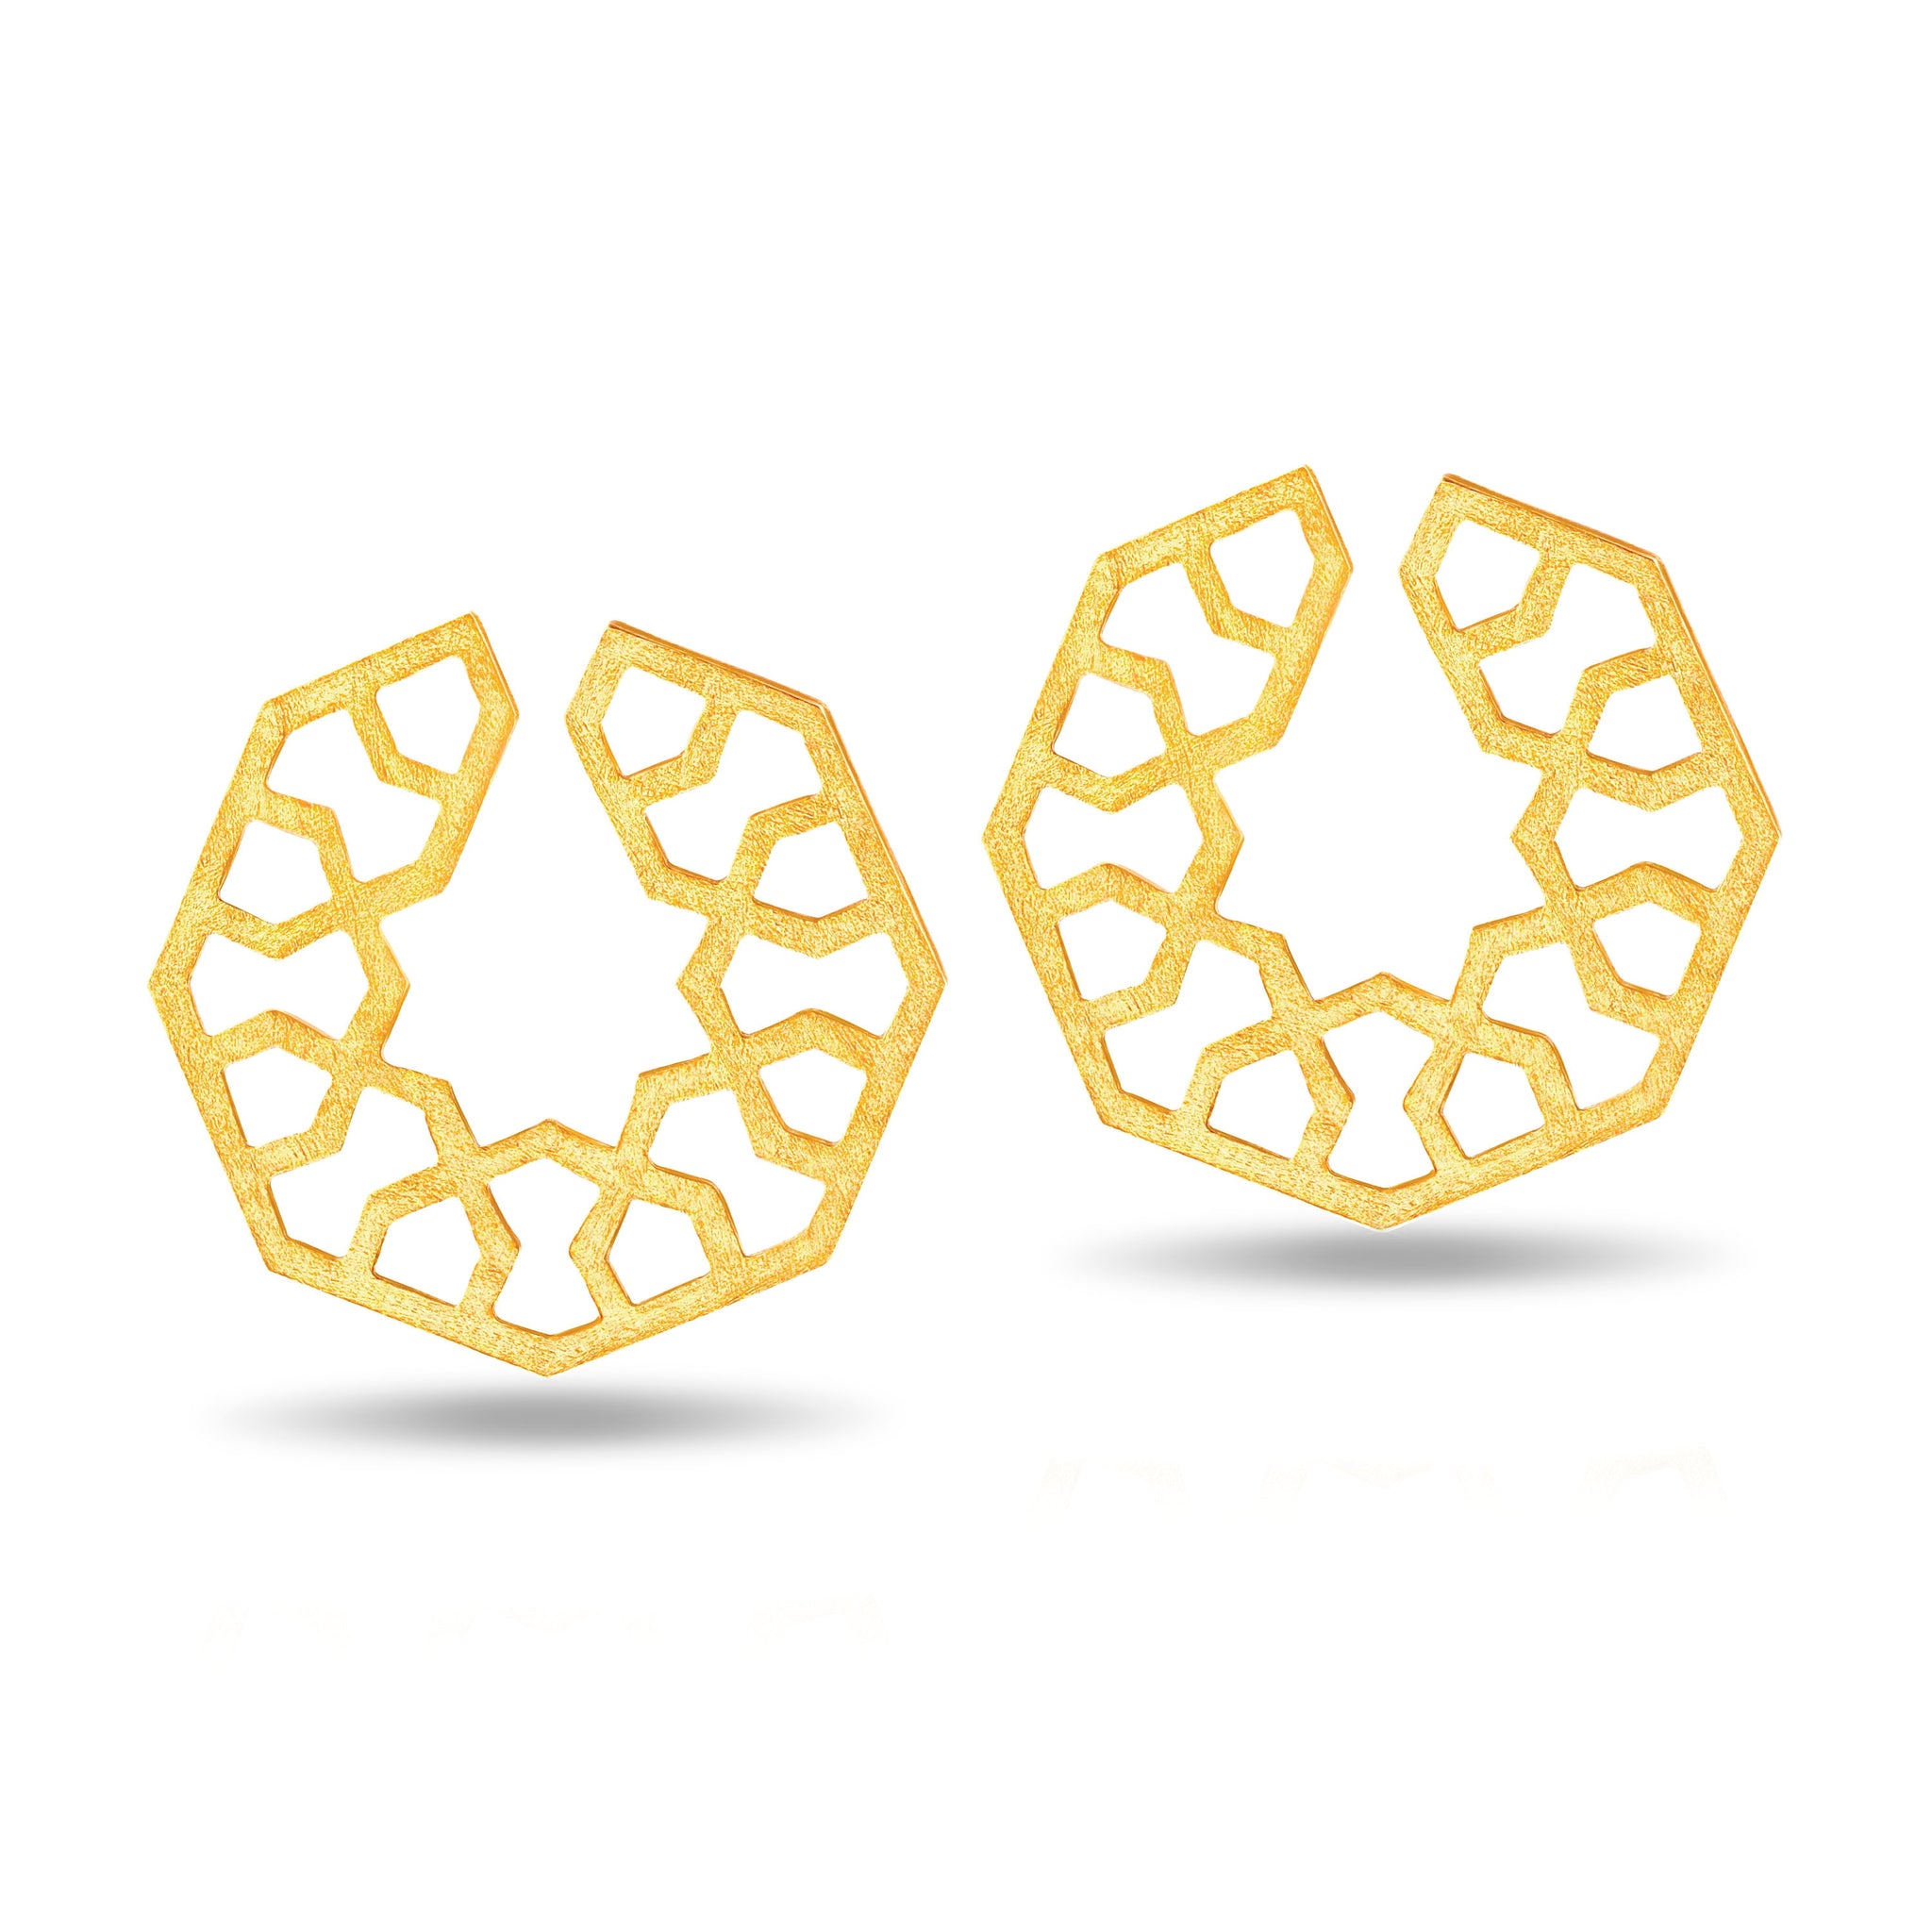 Handmade Afghan Gold Plated Brass Hoop Earrings Geometric Elegant Inspired Jewelry Tessellated Motif Sun Abstract Gift for Her